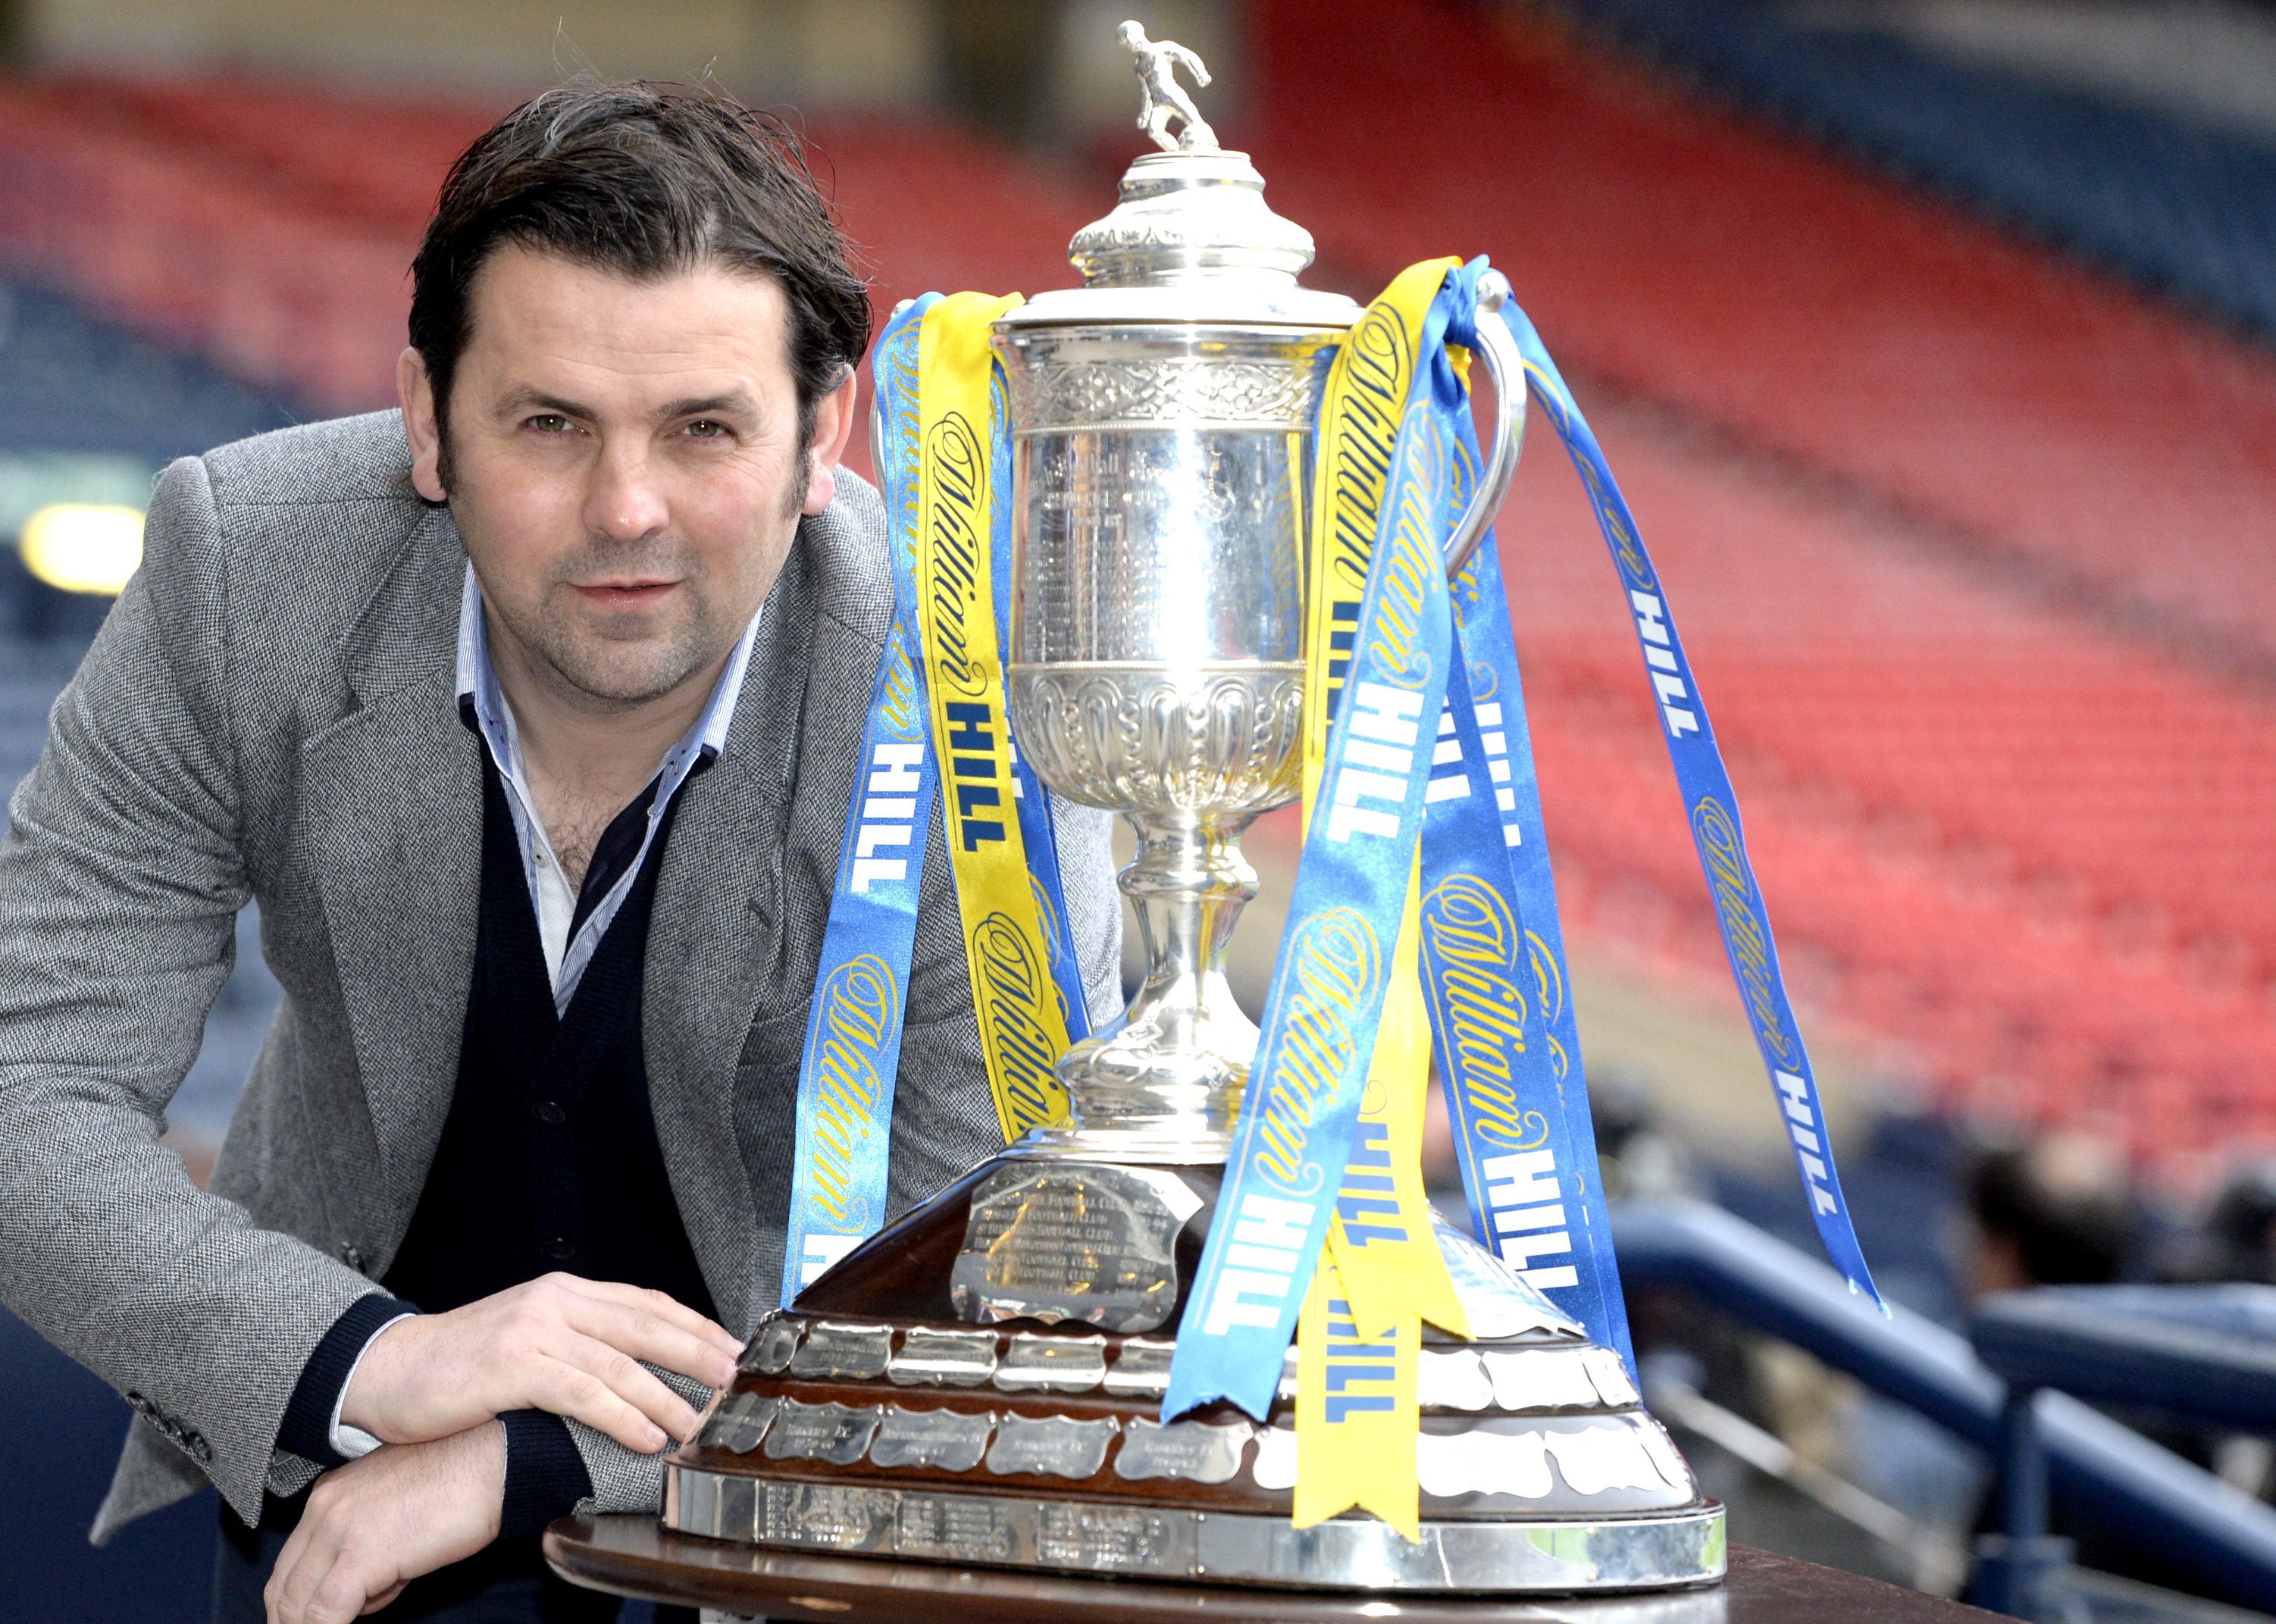 As well as a top six finish, Paul Hartley is hoping for some cup success this season.